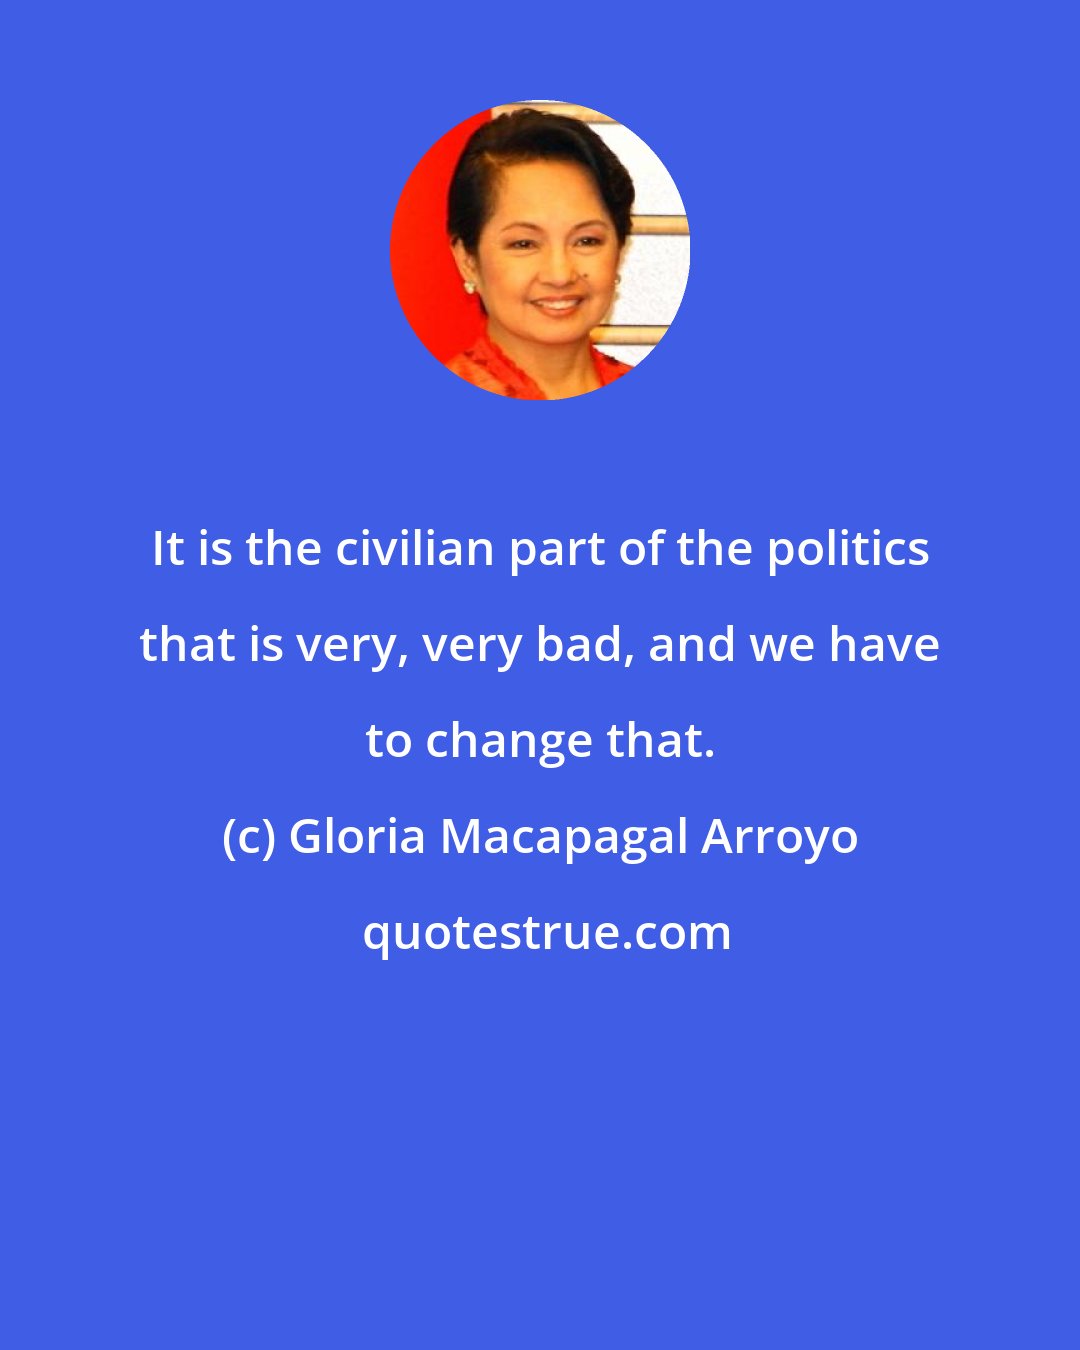 Gloria Macapagal Arroyo: It is the civilian part of the politics that is very, very bad, and we have to change that.